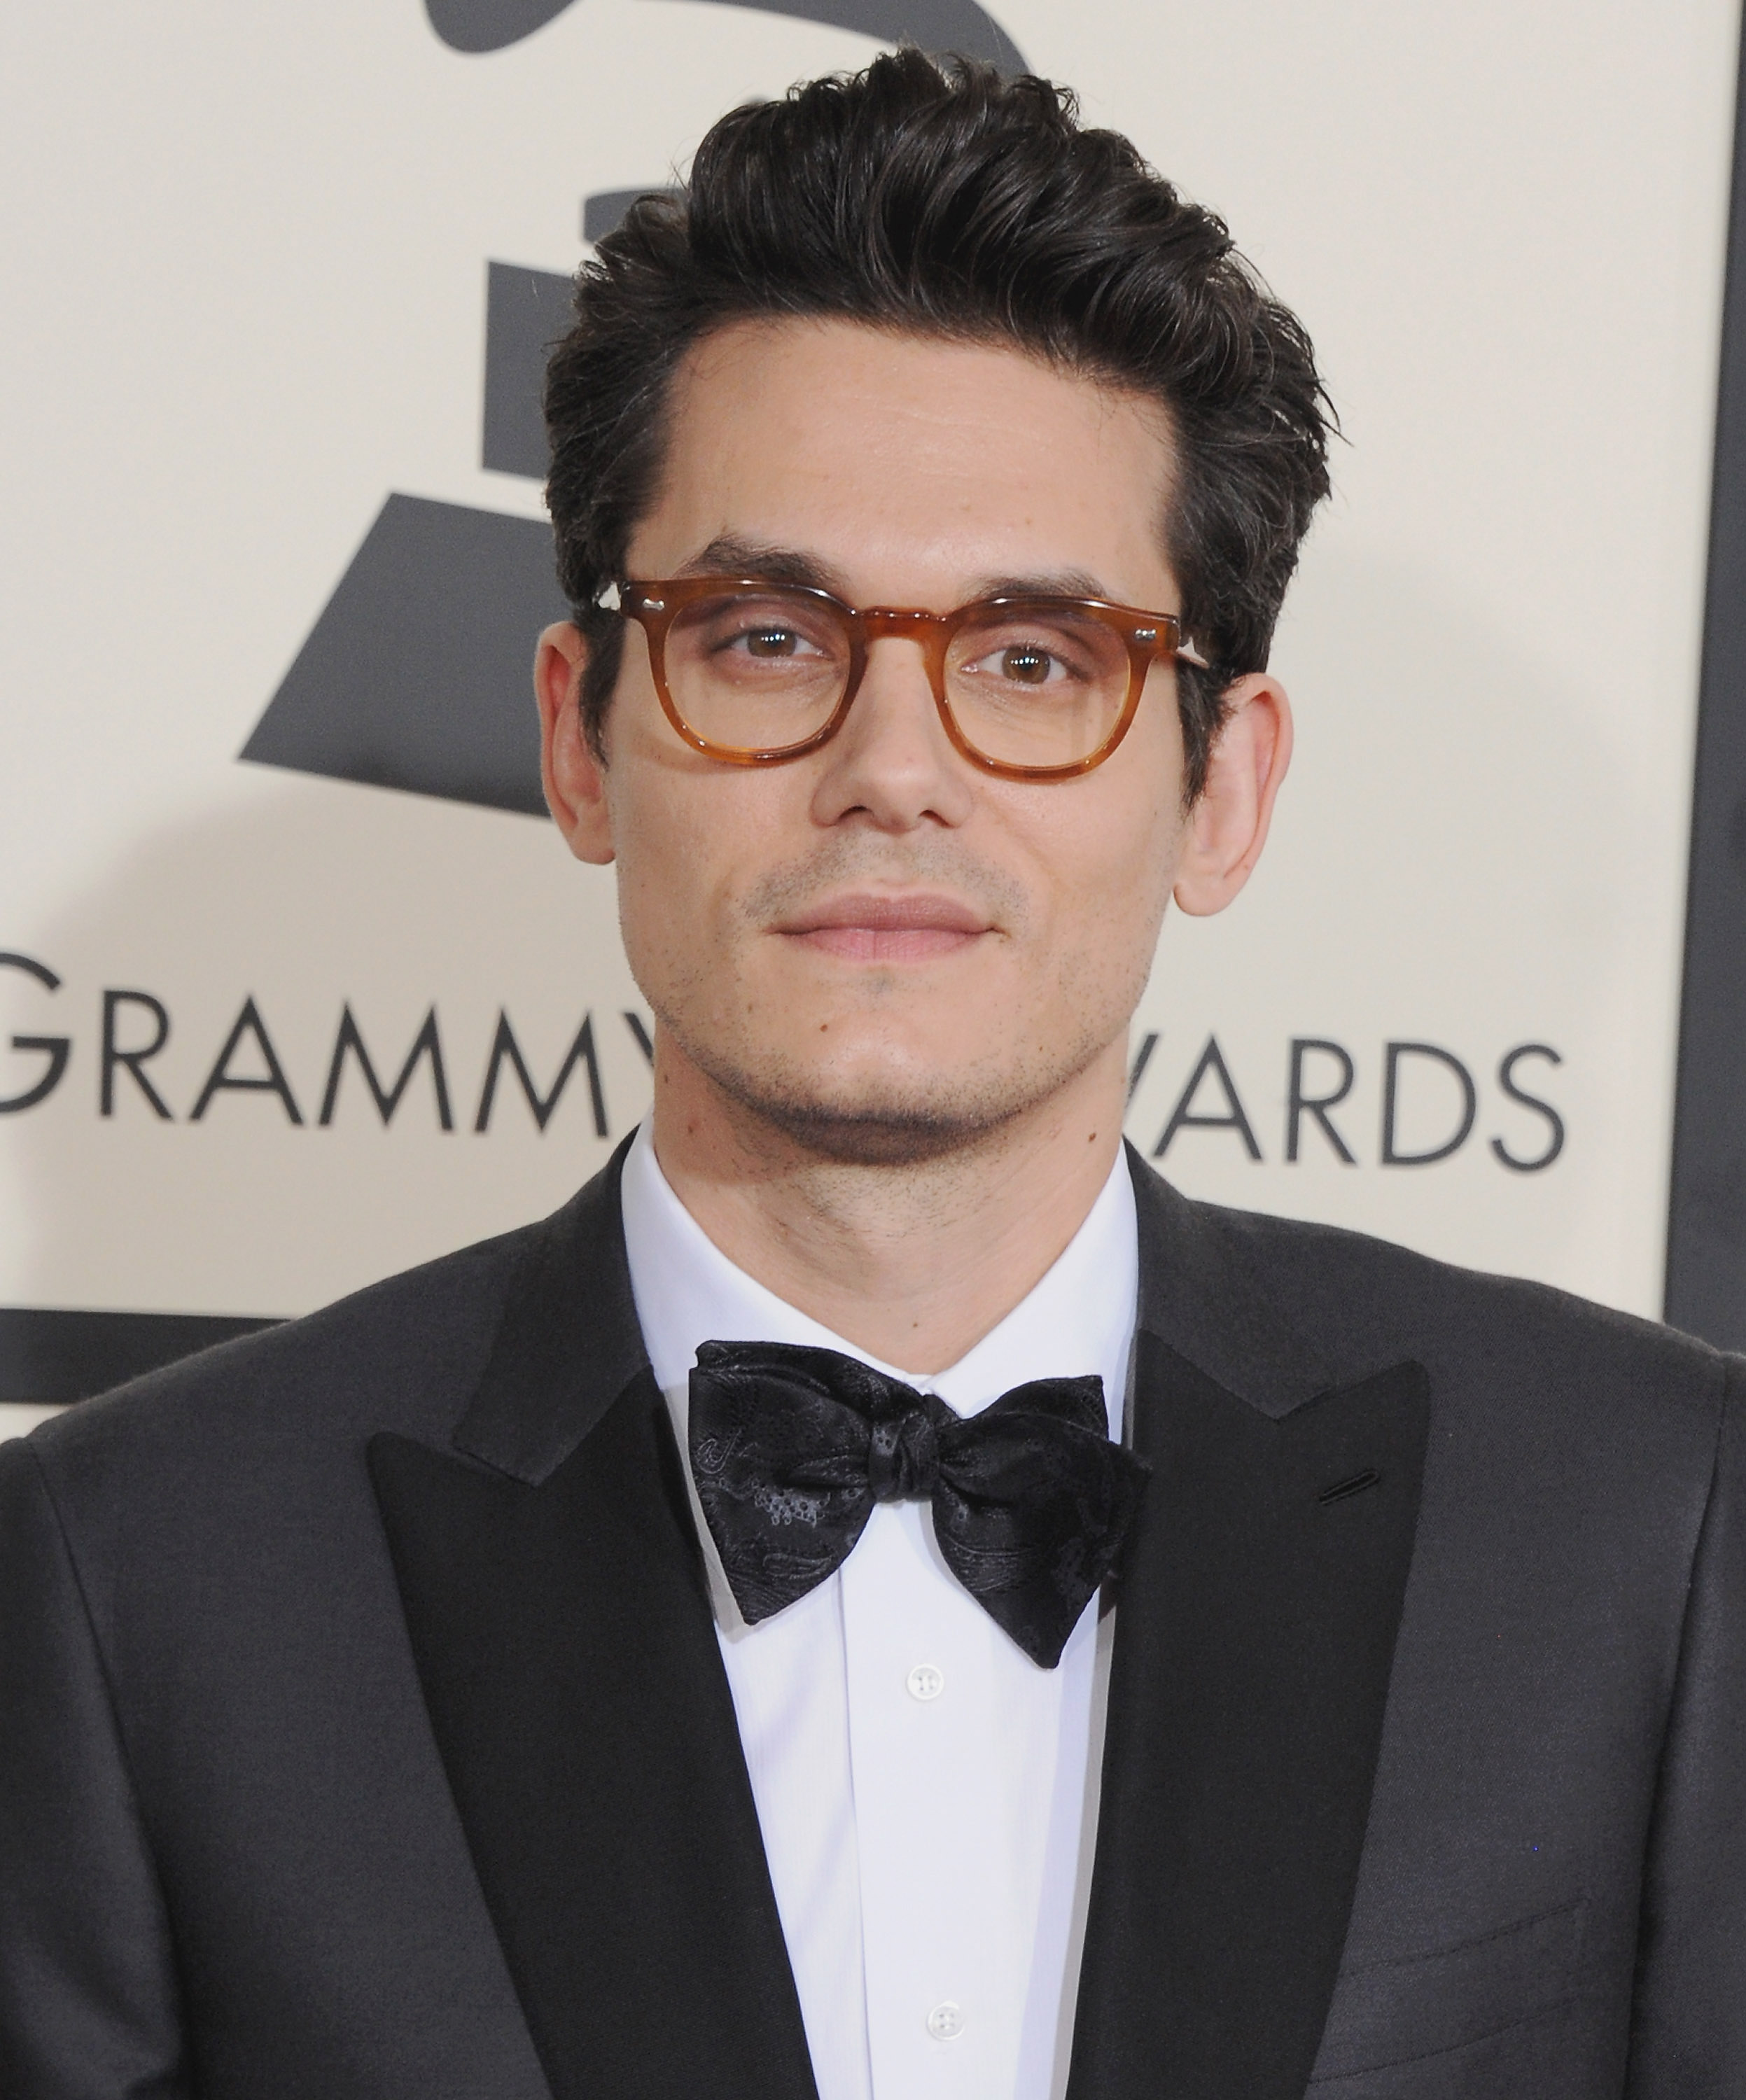 David Stone S Tiny Dick - John Mayer, Eminem, and More Stars Who Have Admitted to ...